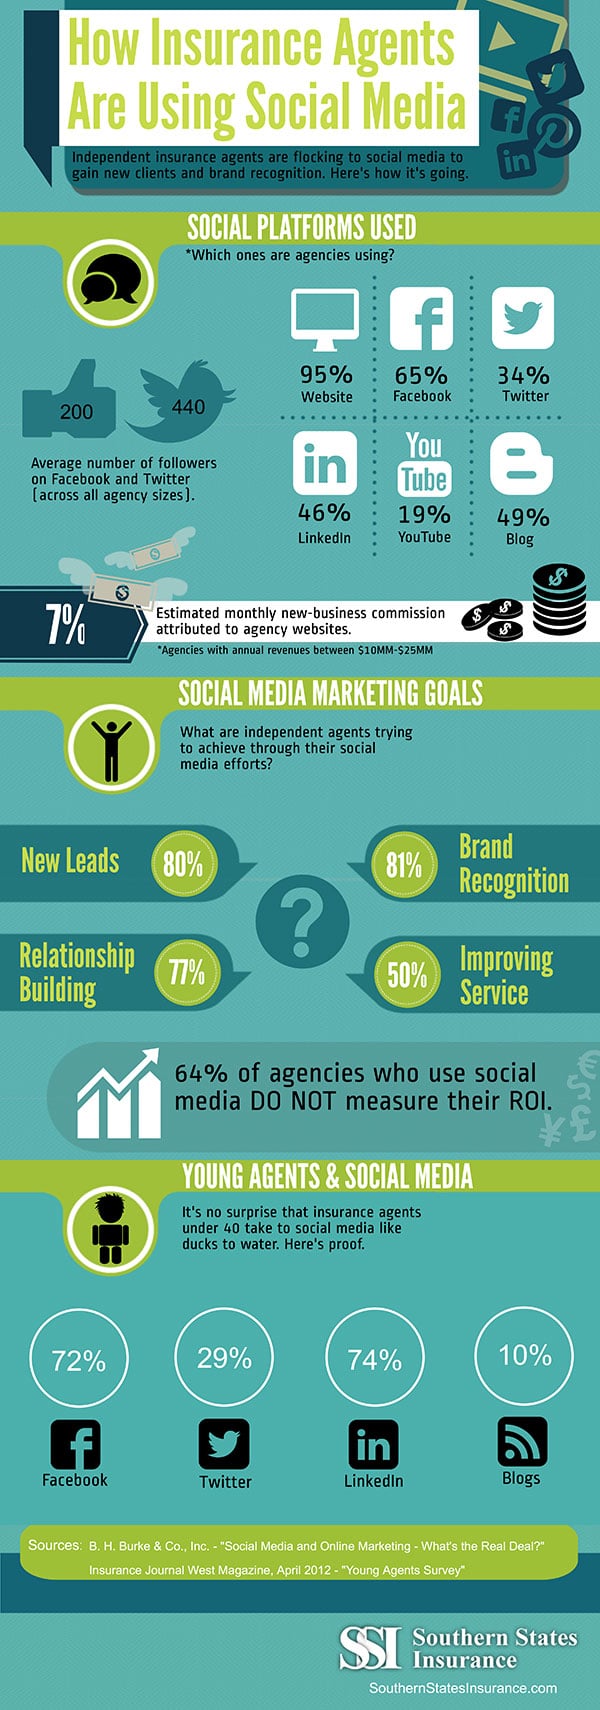 How Insurance Agents Are Using Social Media [Infographic]